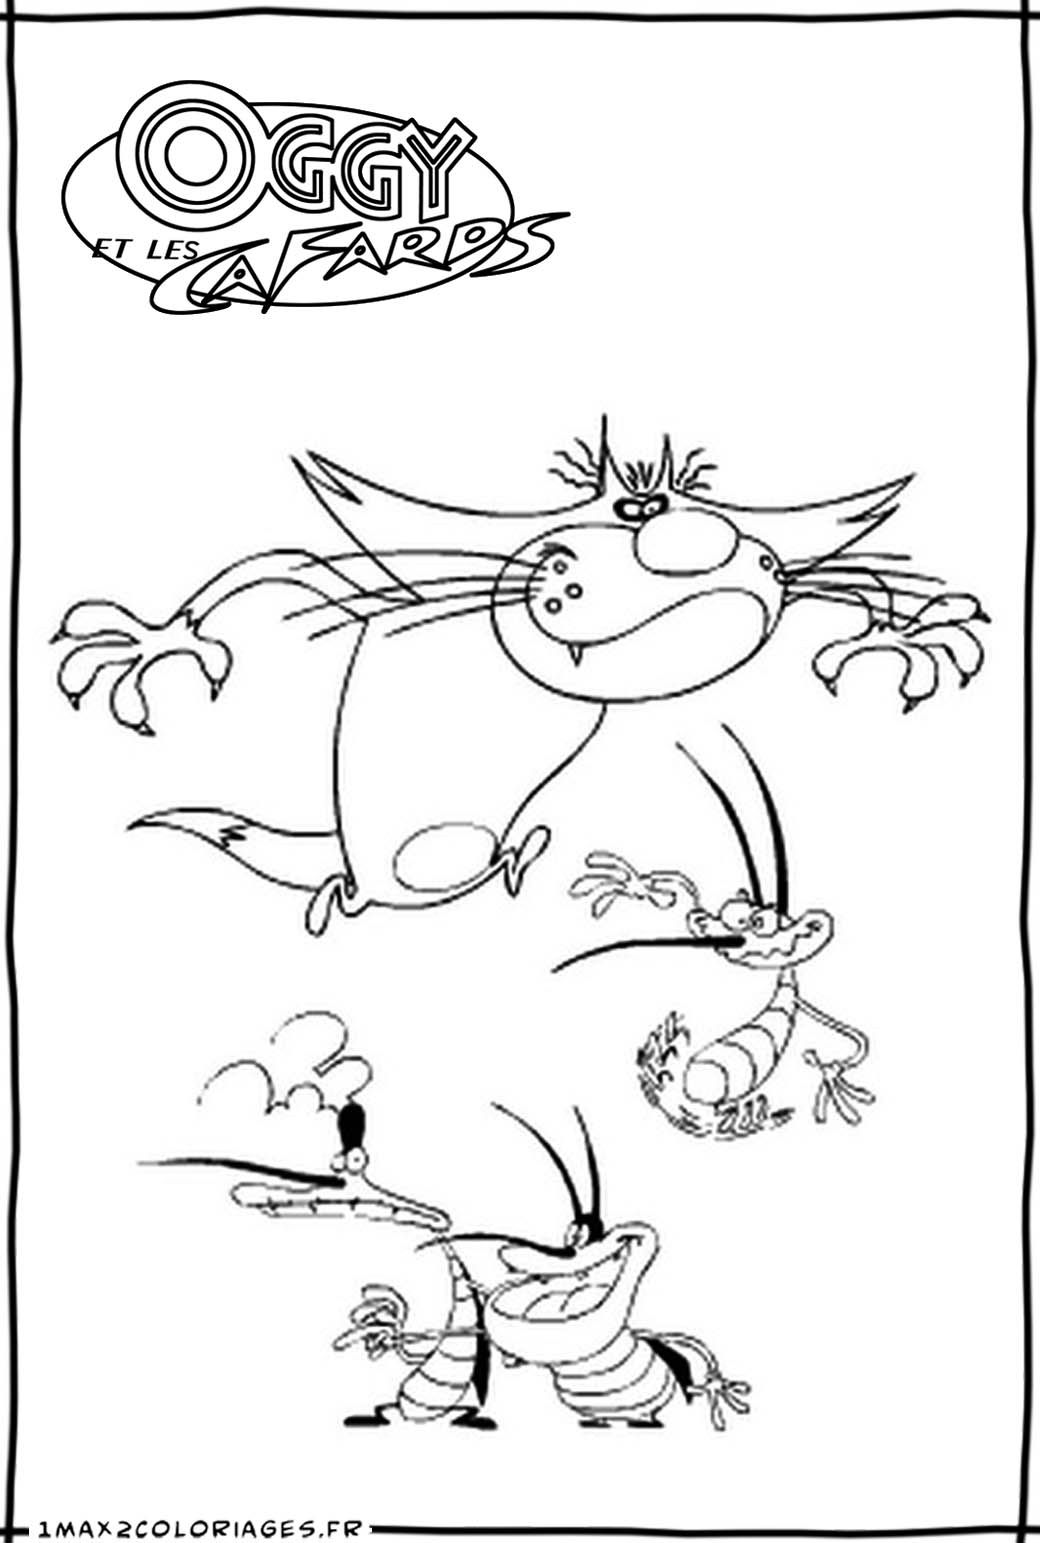 Cool Oggy And The Cockroaches 27 Coloring Page